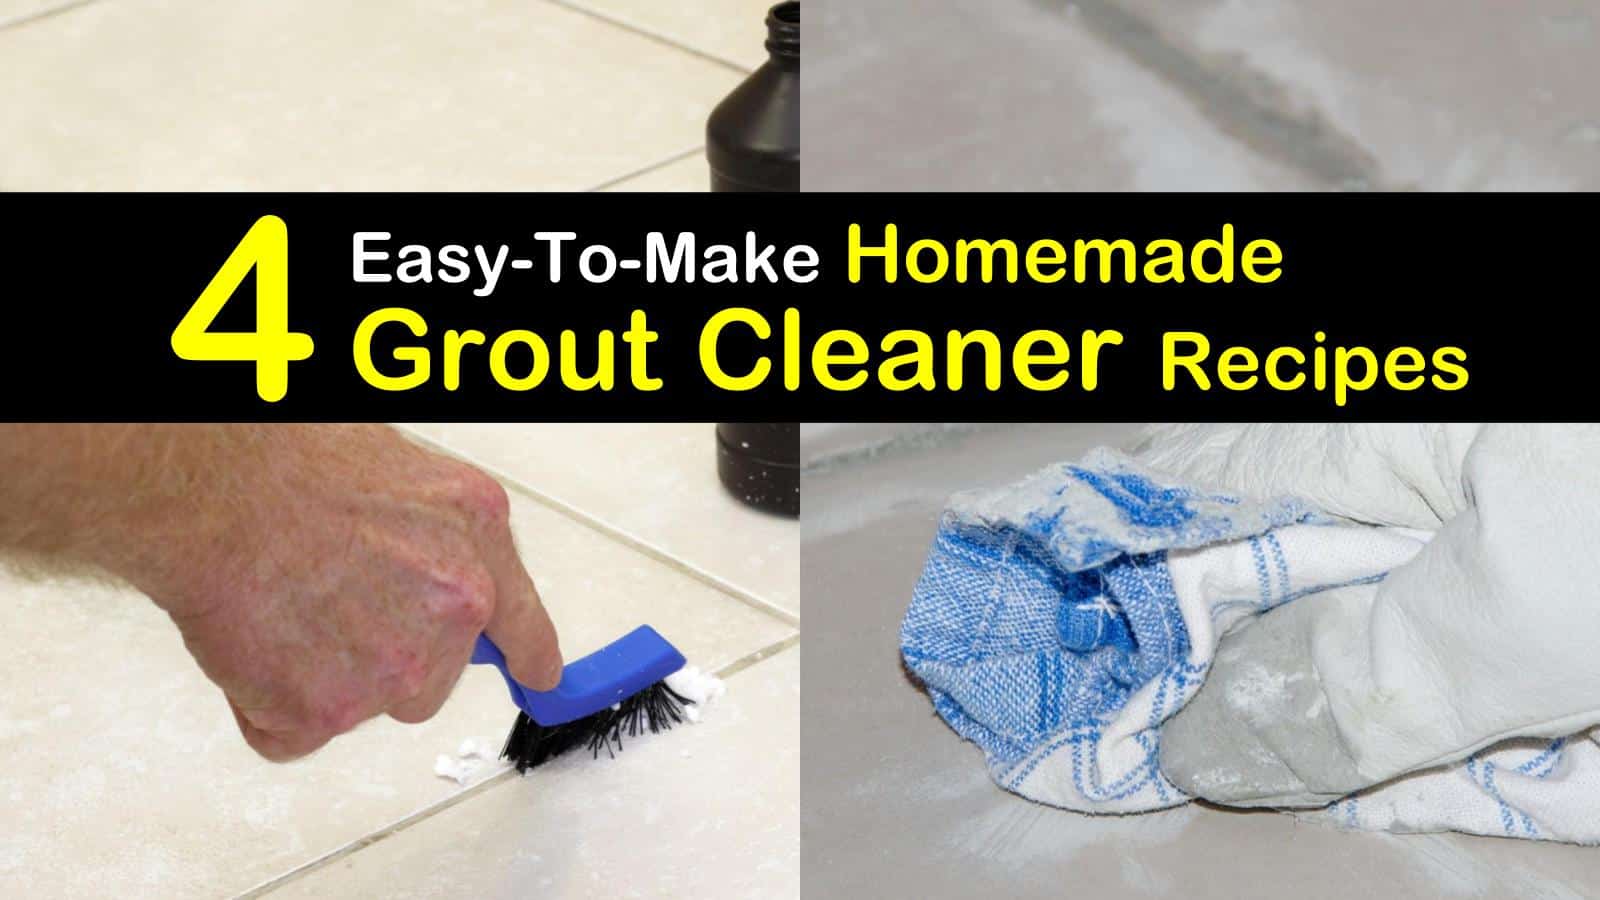 DIY homemade grout cleaner img